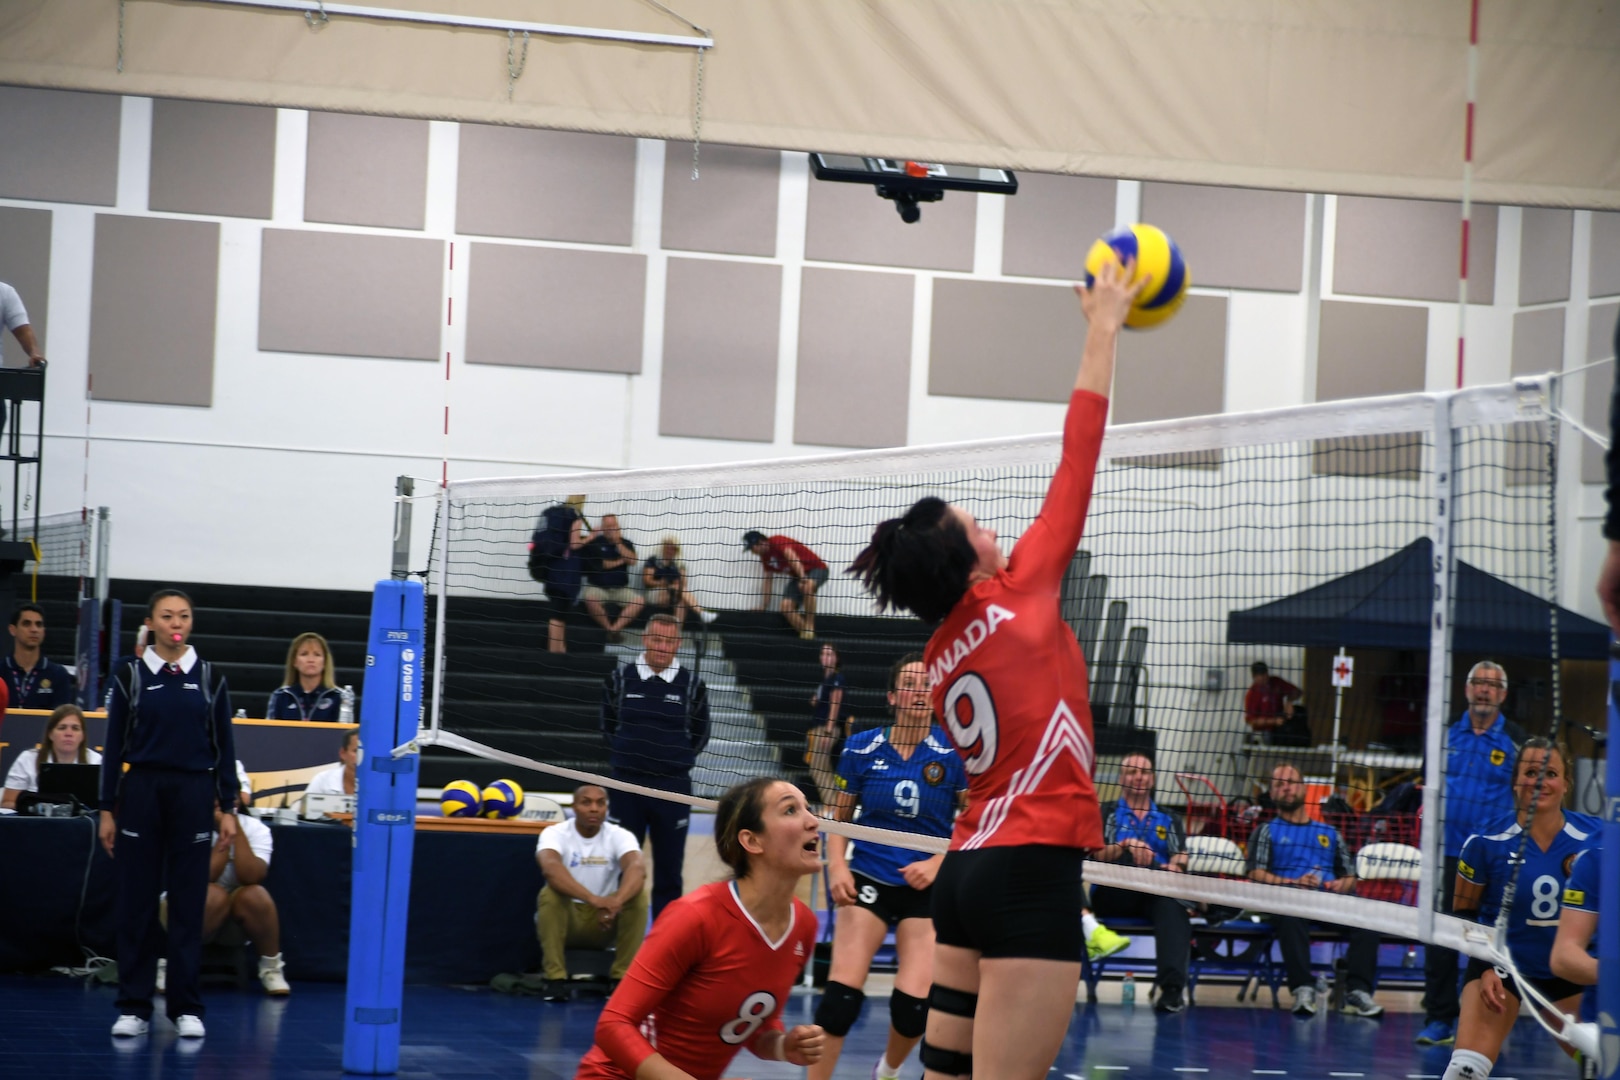 AB Norah Collins (#9) of Canada spikes the ball in their match against Germany of the 18th Conseil International du Sport Militaire (CISM) World Women's Military Volleyball Championship at Naval Station Mayport, Florida on 4 June 2017. Mayport is hosting the CISM Championship from 2-11 June.  Finals are on 9 June.